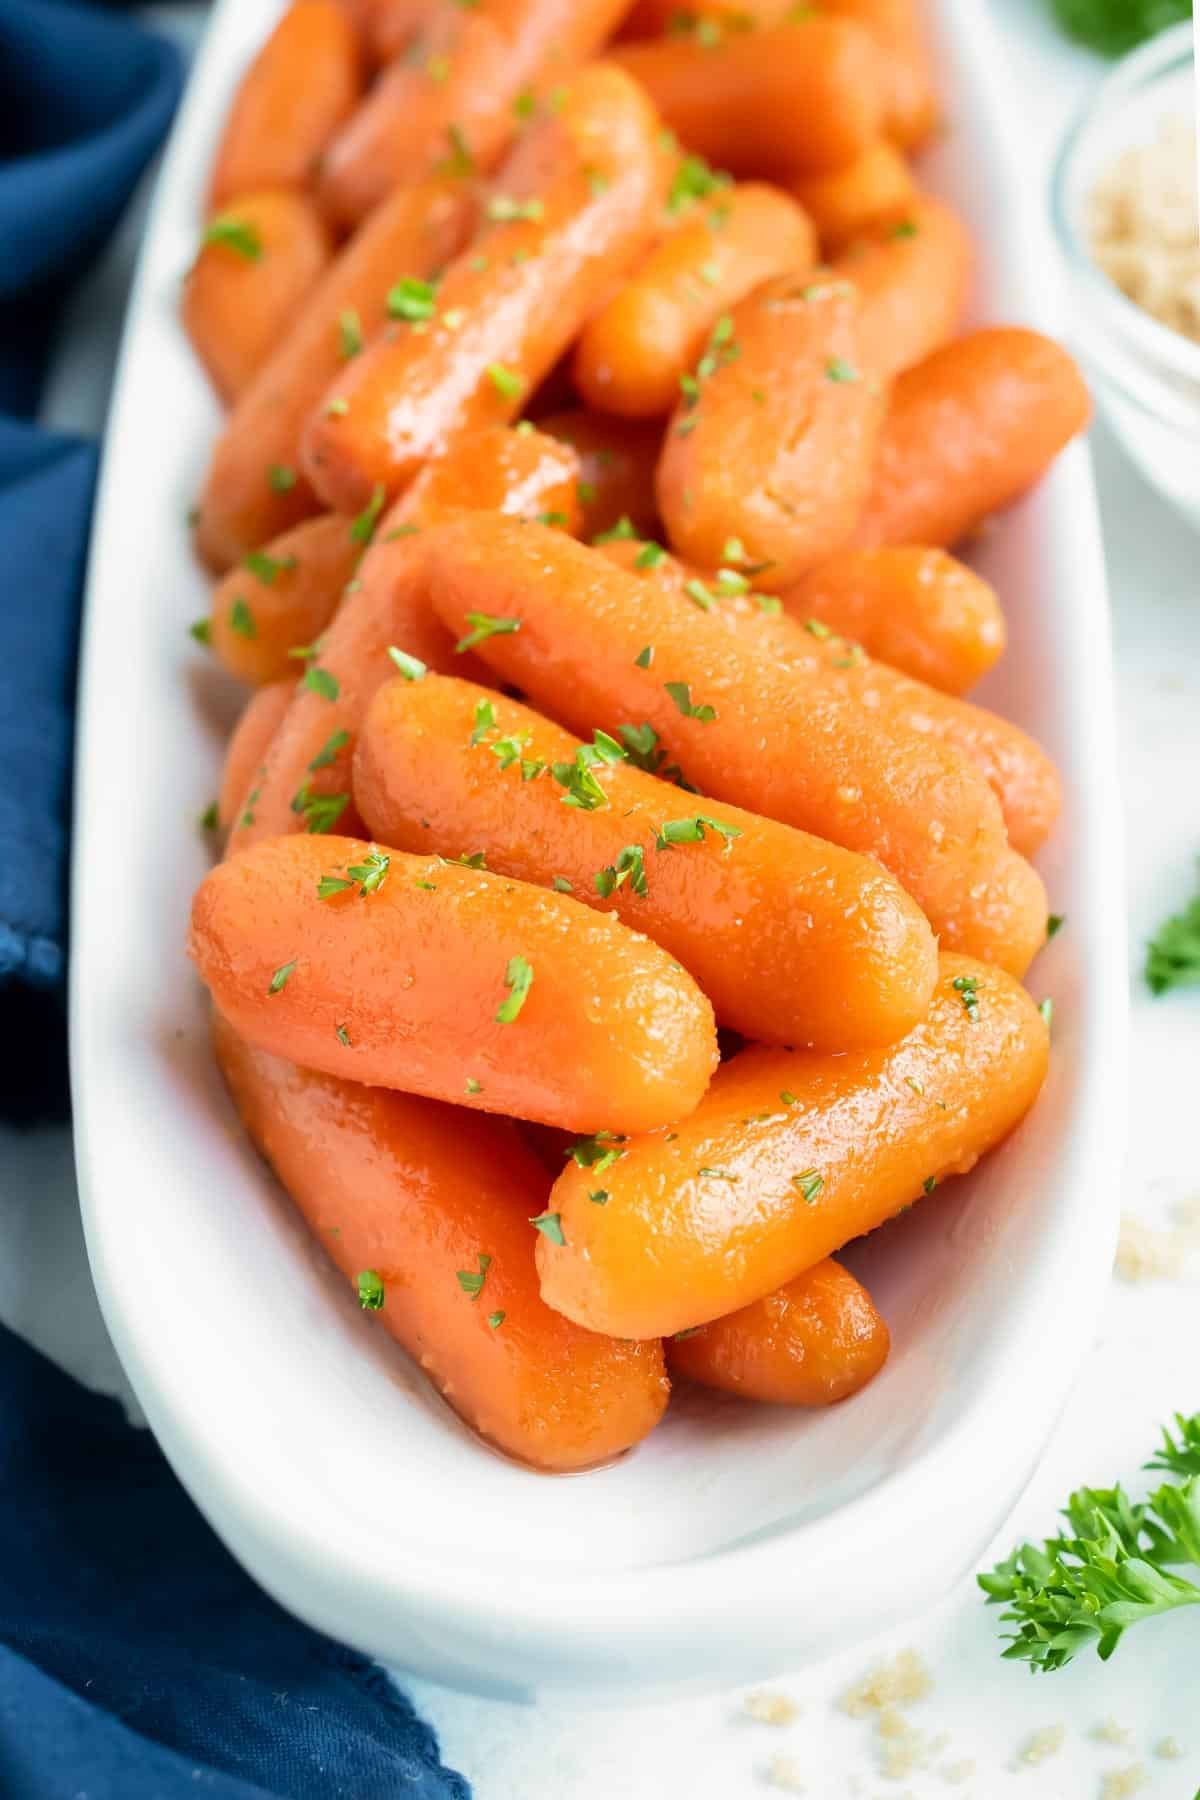 Easy Easter side dish for honey carrots with a brown sugar glaze that were made in a slow cooker.